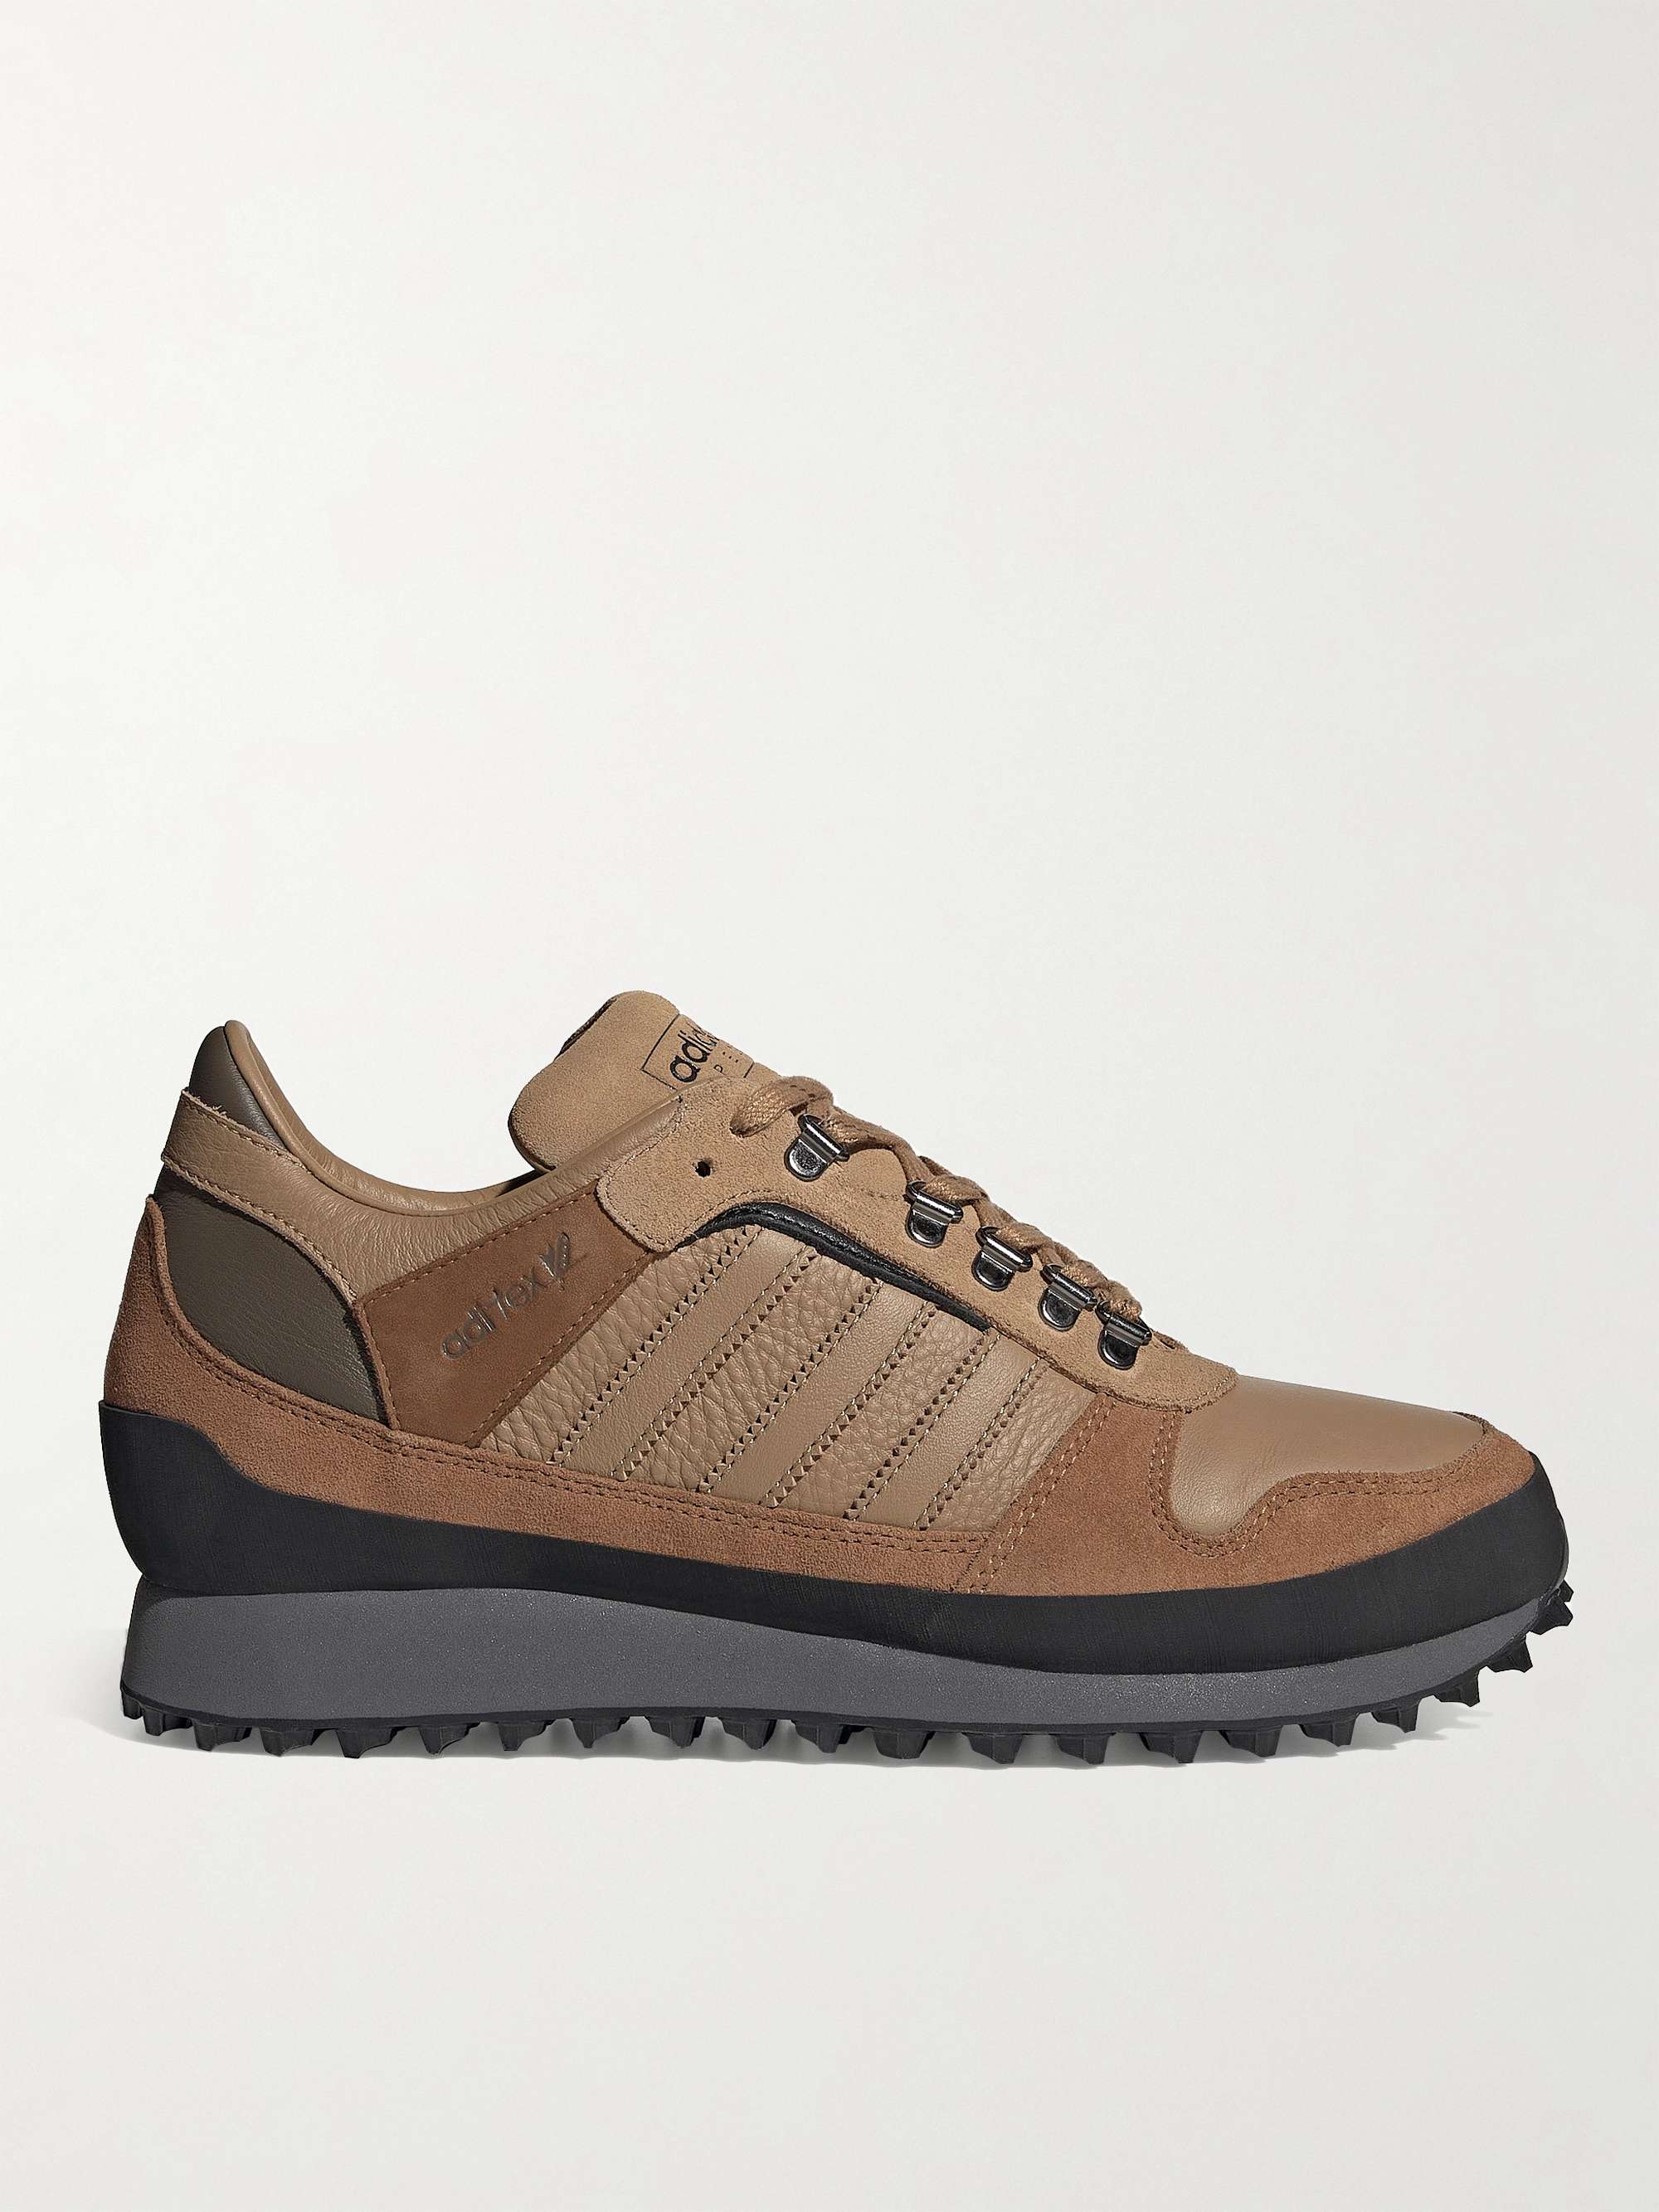 ADIDAS CONSORTIUM SPZL Leather and Nubuck-Trimmed Suede Sneakers for Men | MR PORTER